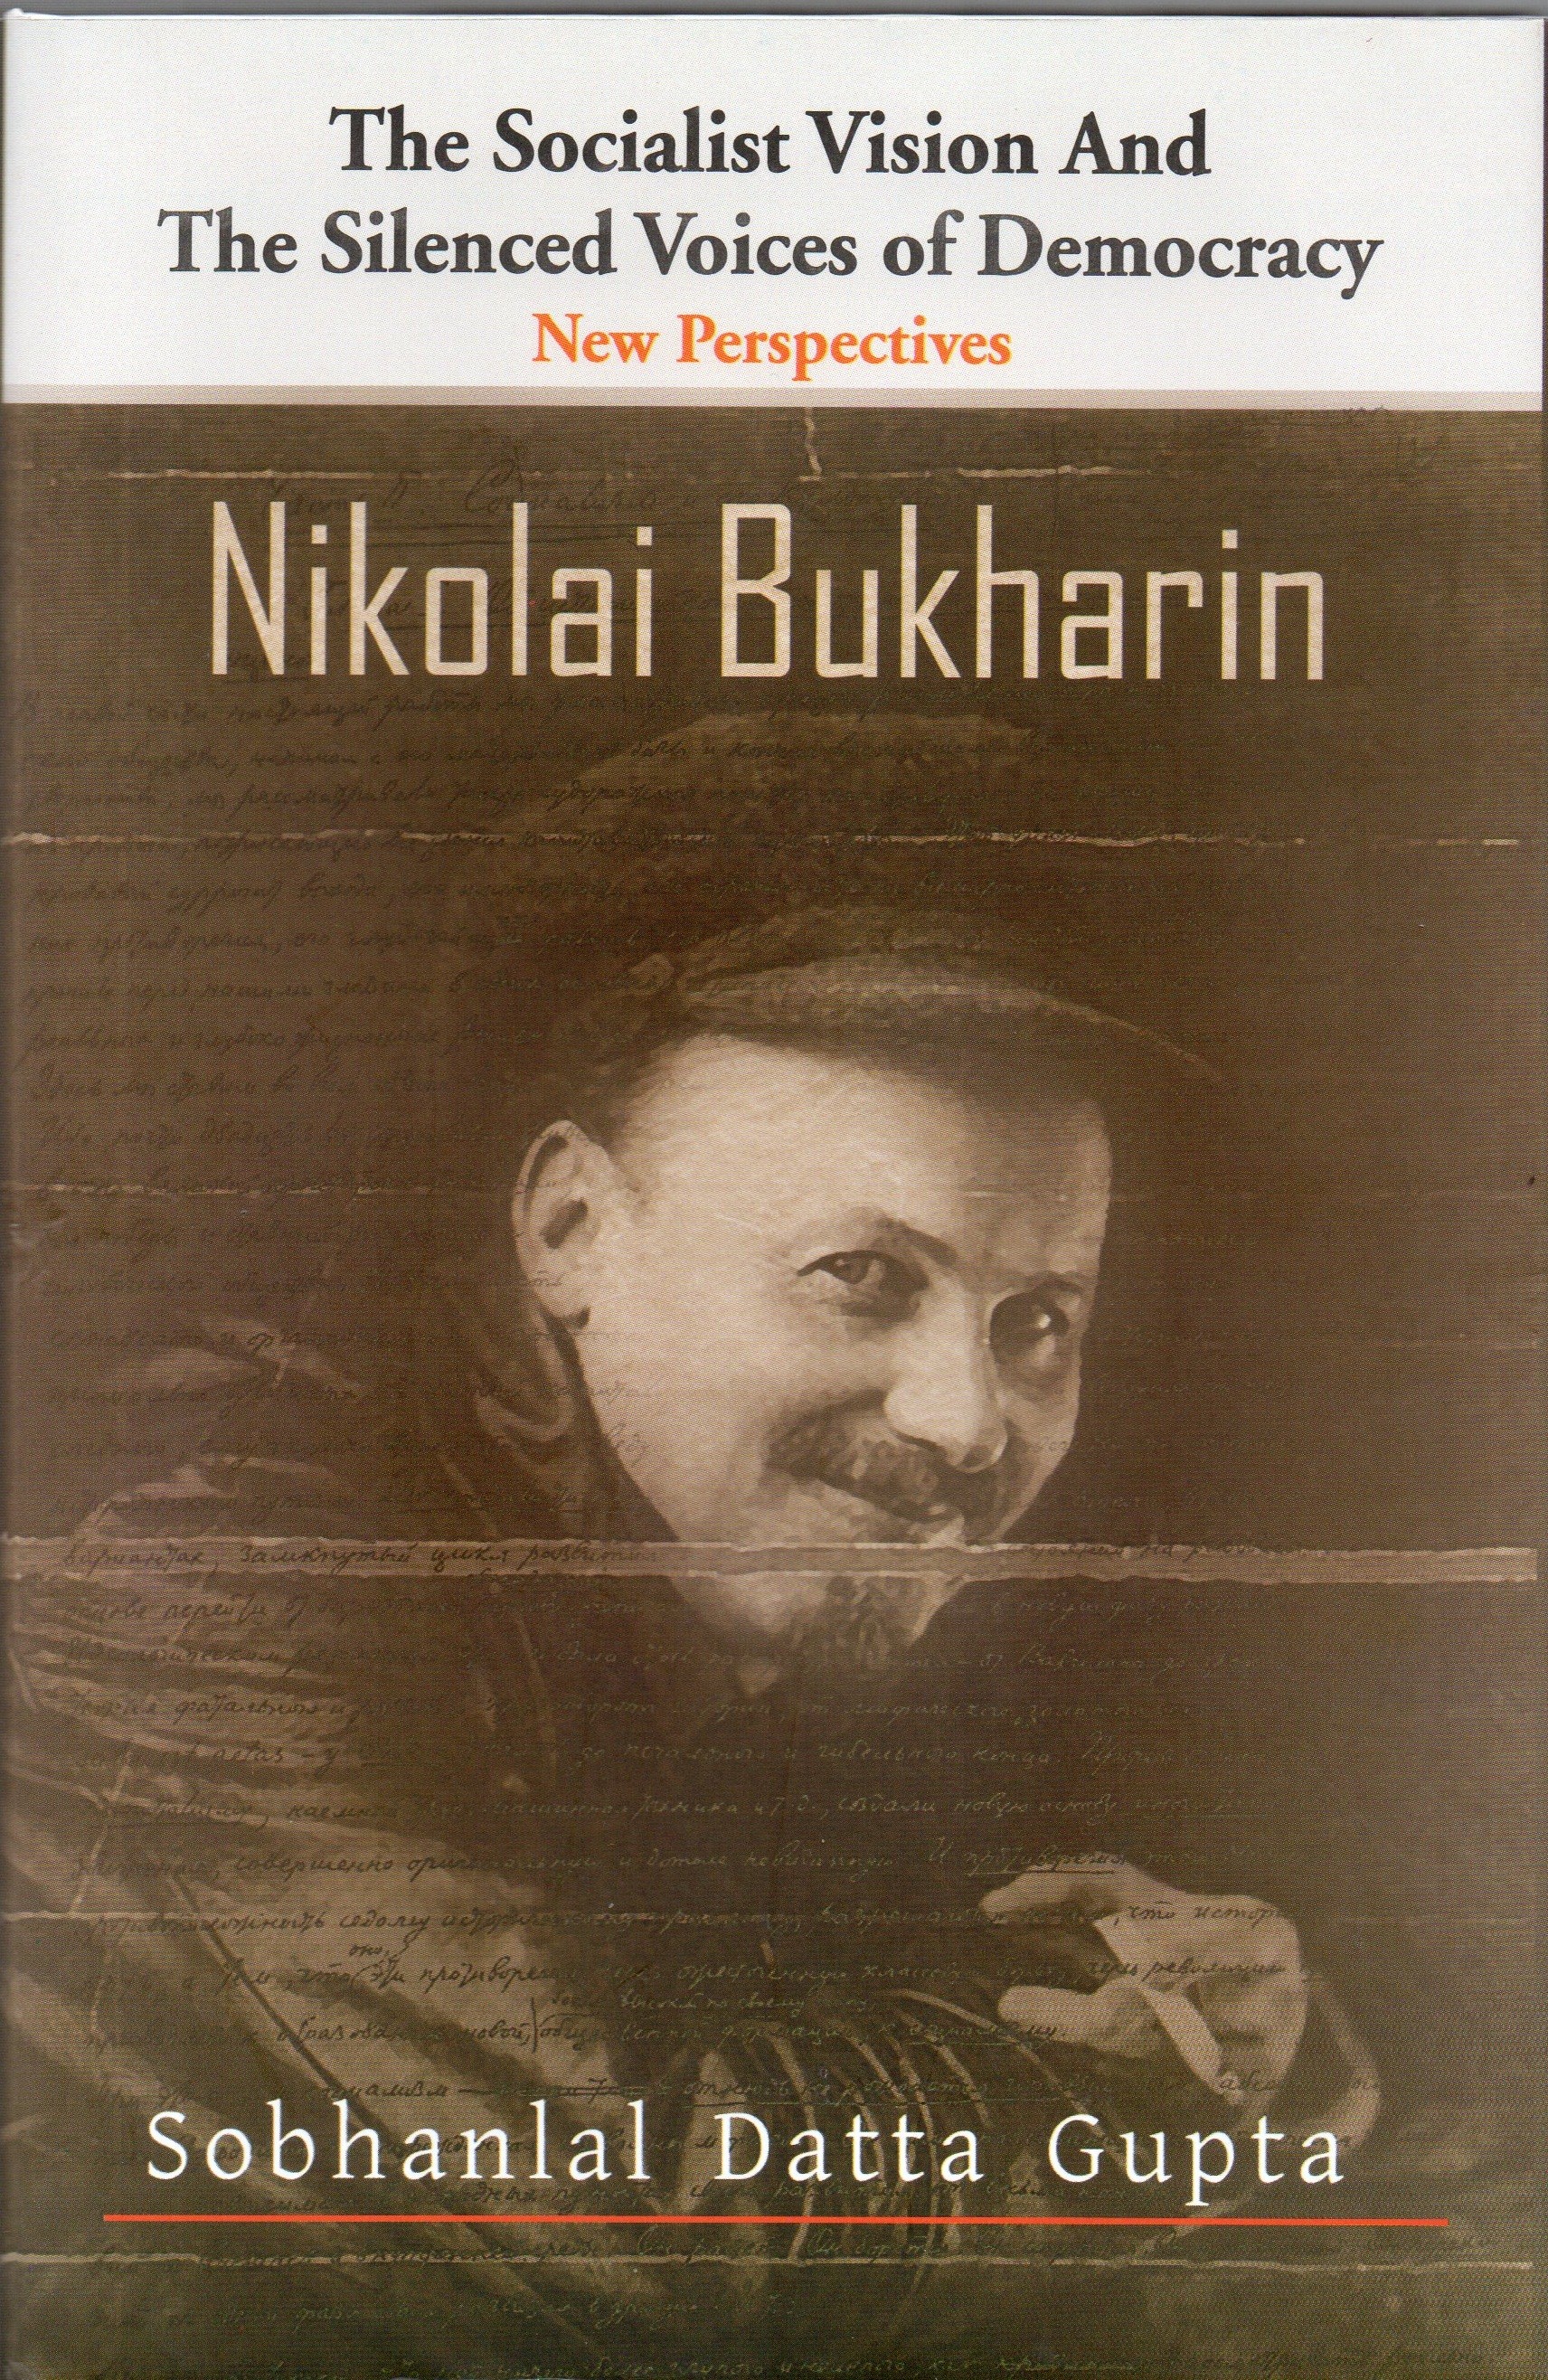 The Socialist Vision and the Silenced Voices of Democracy- New Perspectives- Nikolai Bukharin